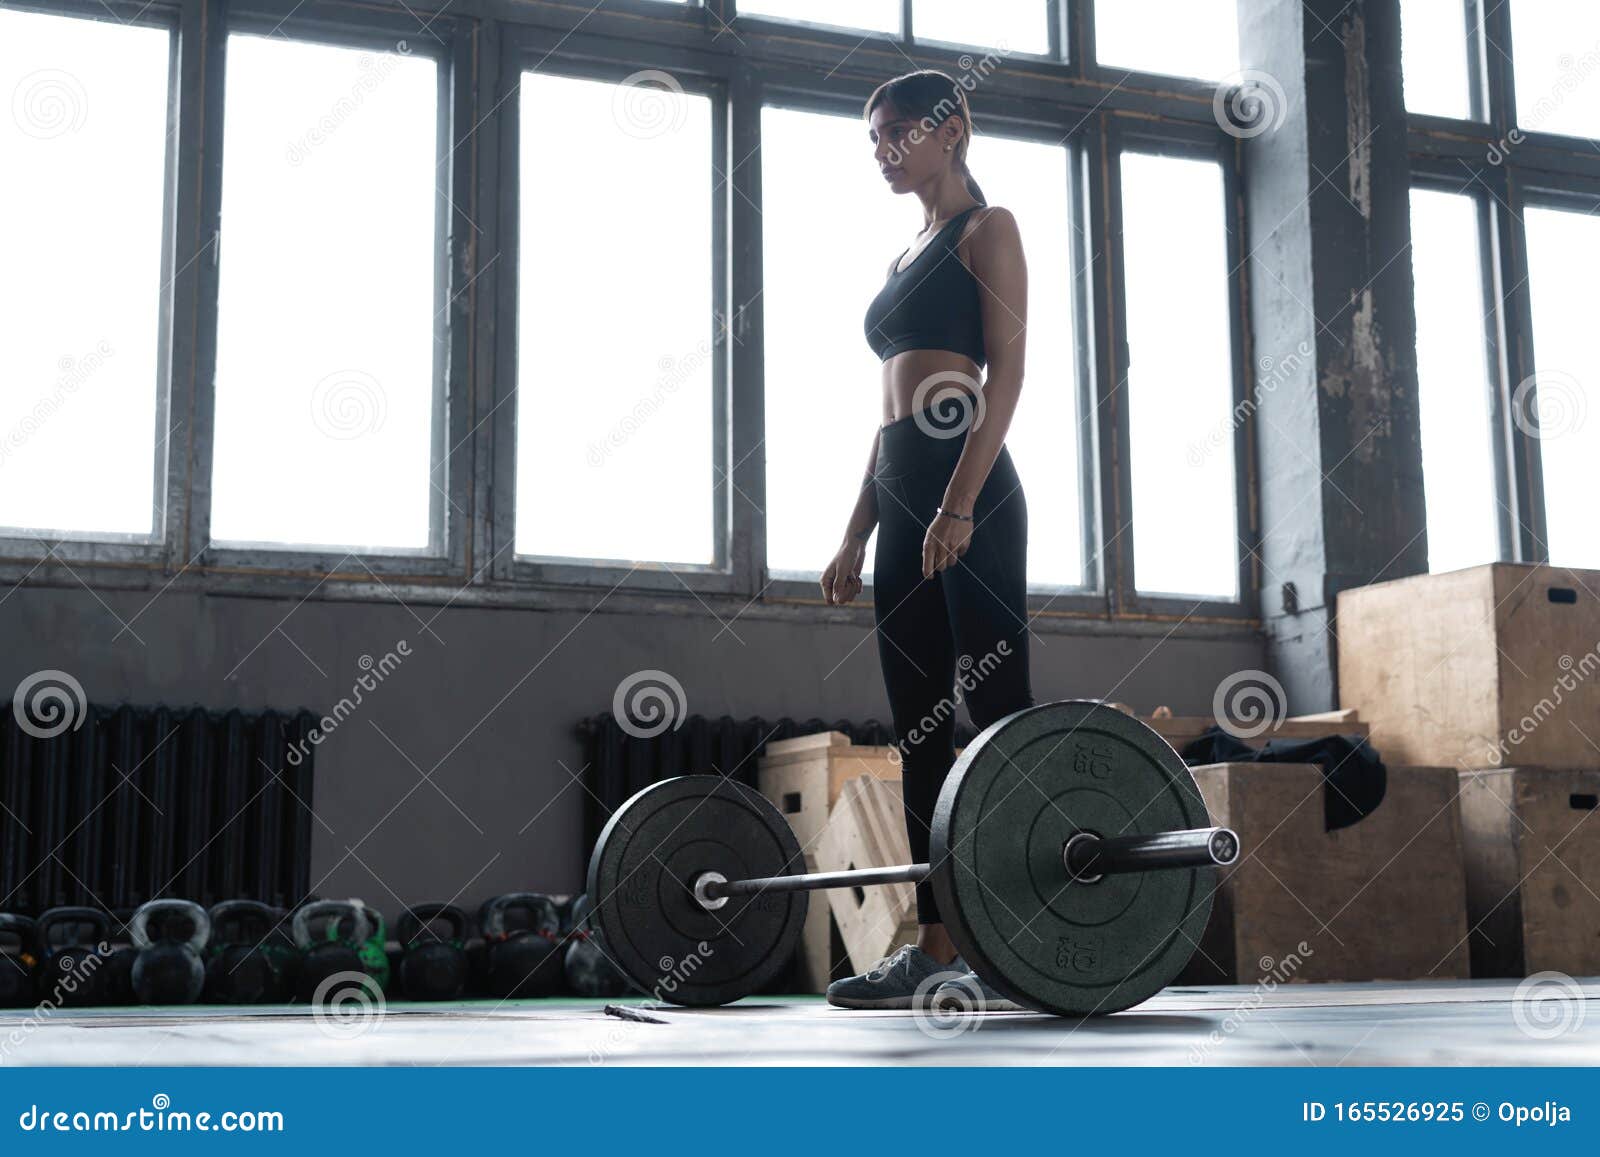 Attractive Strong Muscular Female Bodybuilder Doing Heavy Duty Squats ...